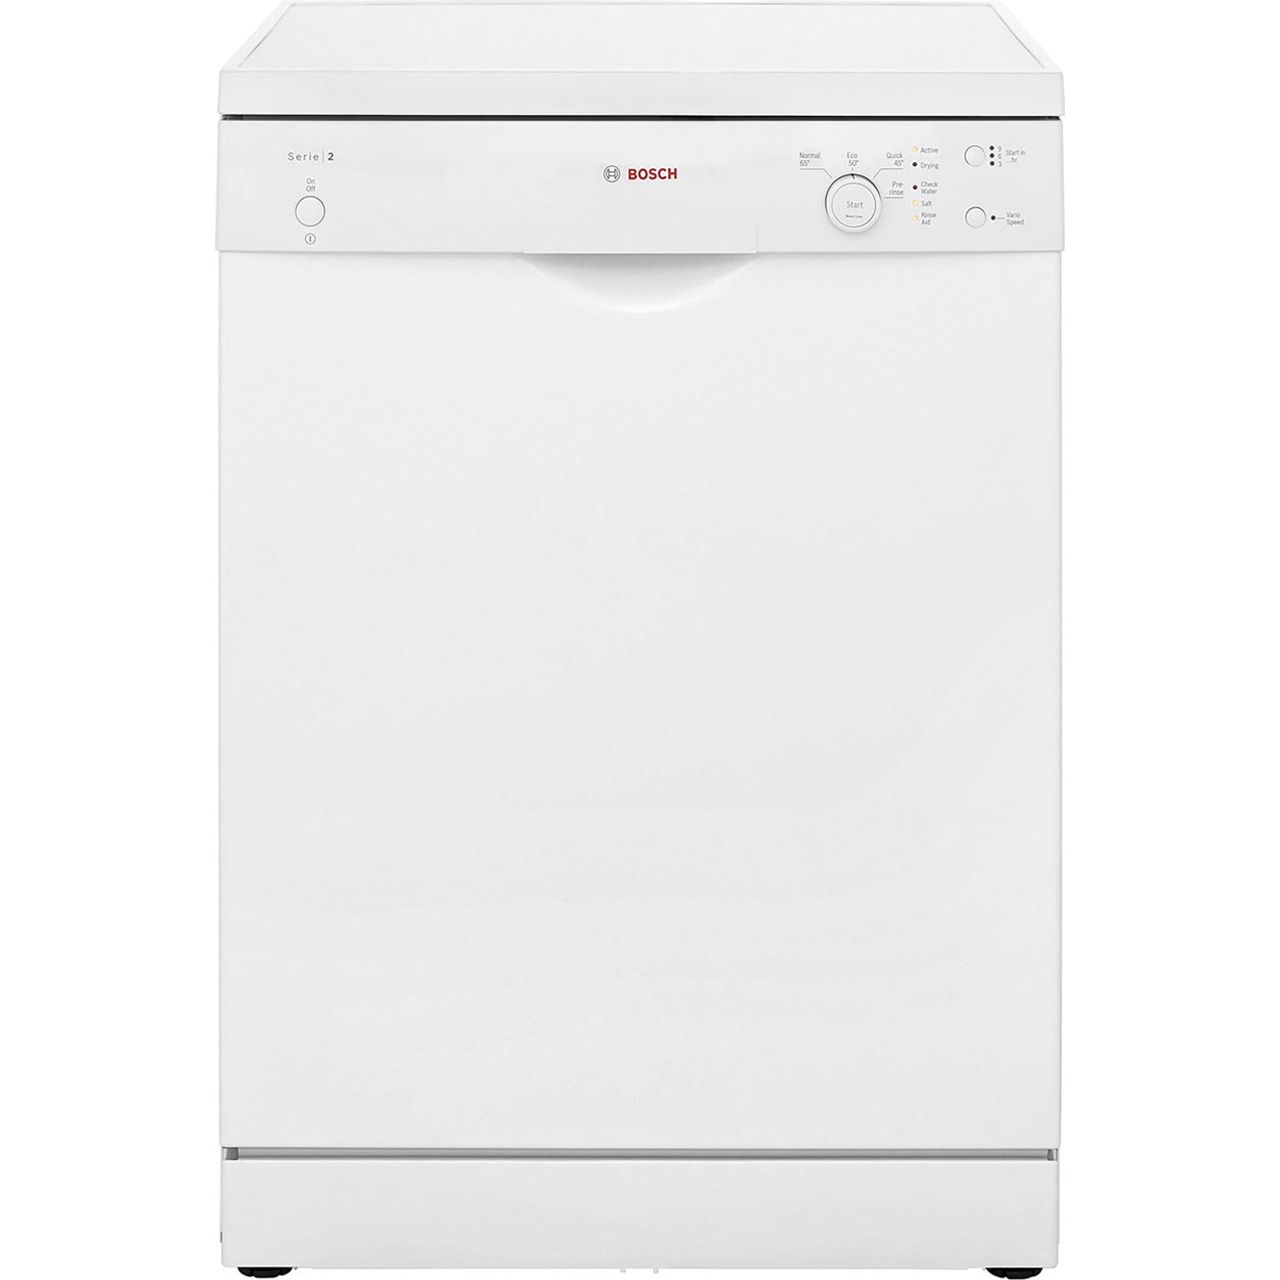 Bosch Serie 2 SMS24AW01G Standard Dishwasher Review